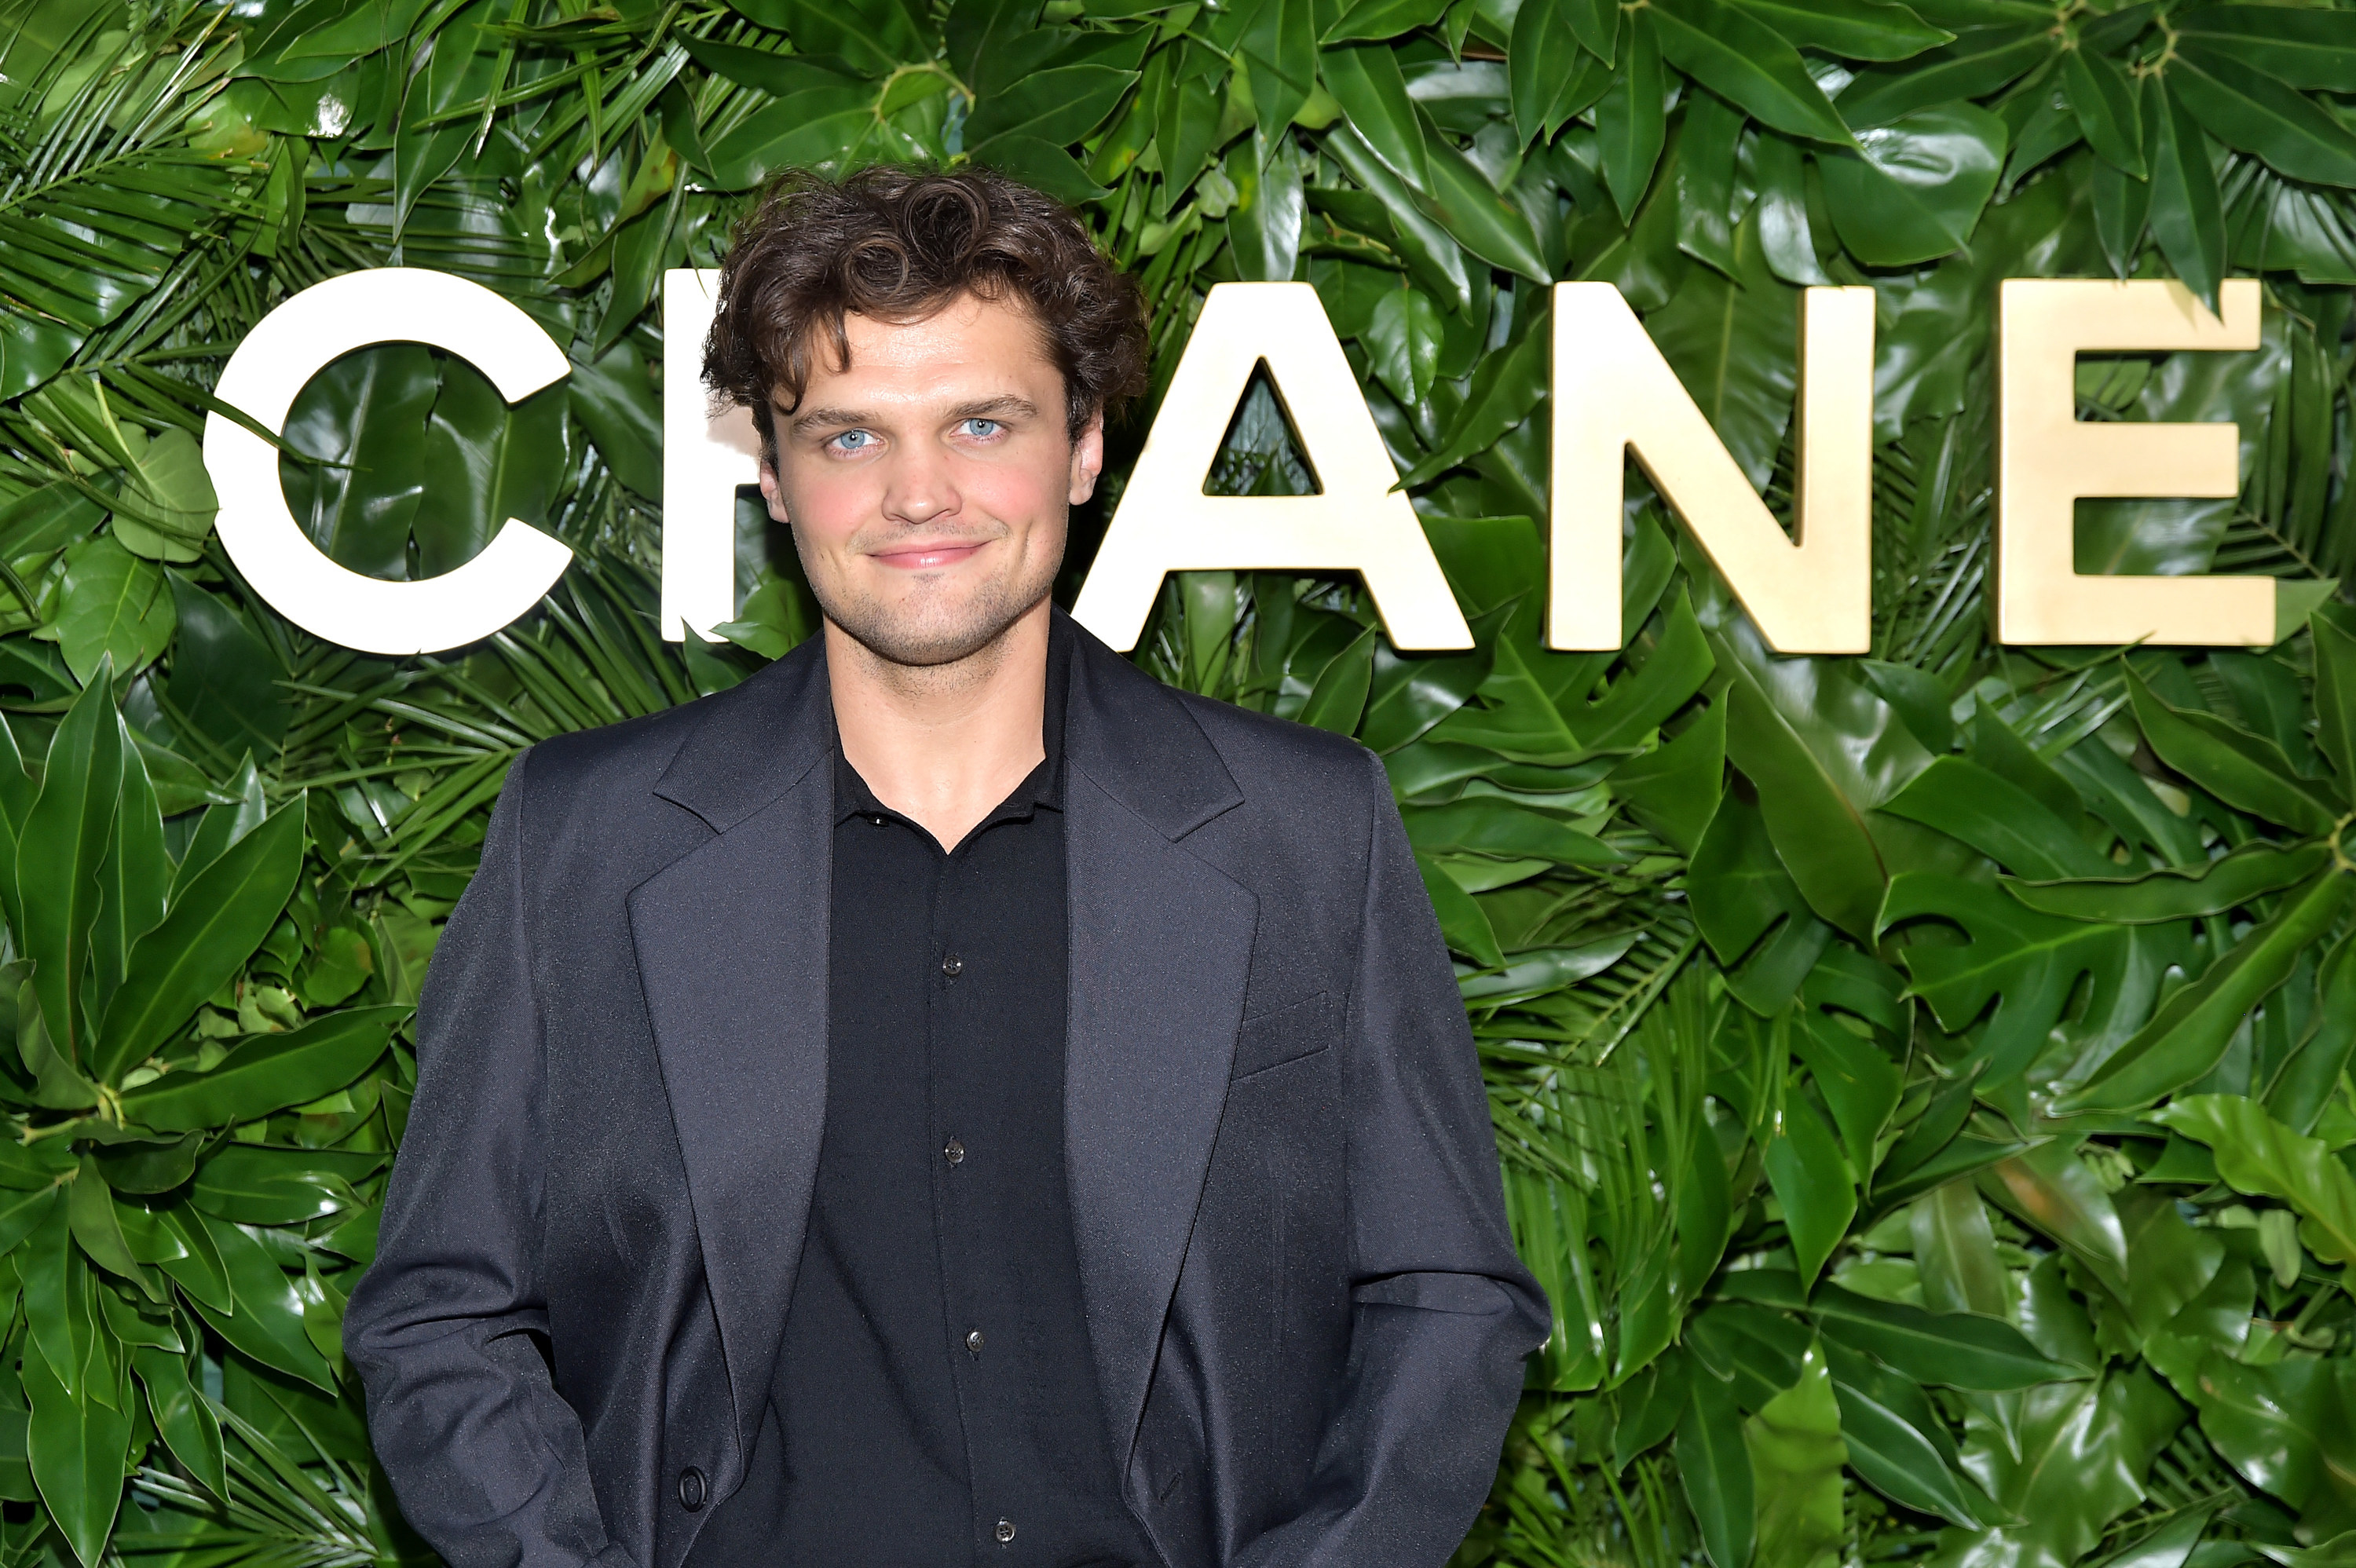 Smiling Ray in a shirt and suit jacket stands behind a leafy backdrop with &quot;Chanel&quot; logo